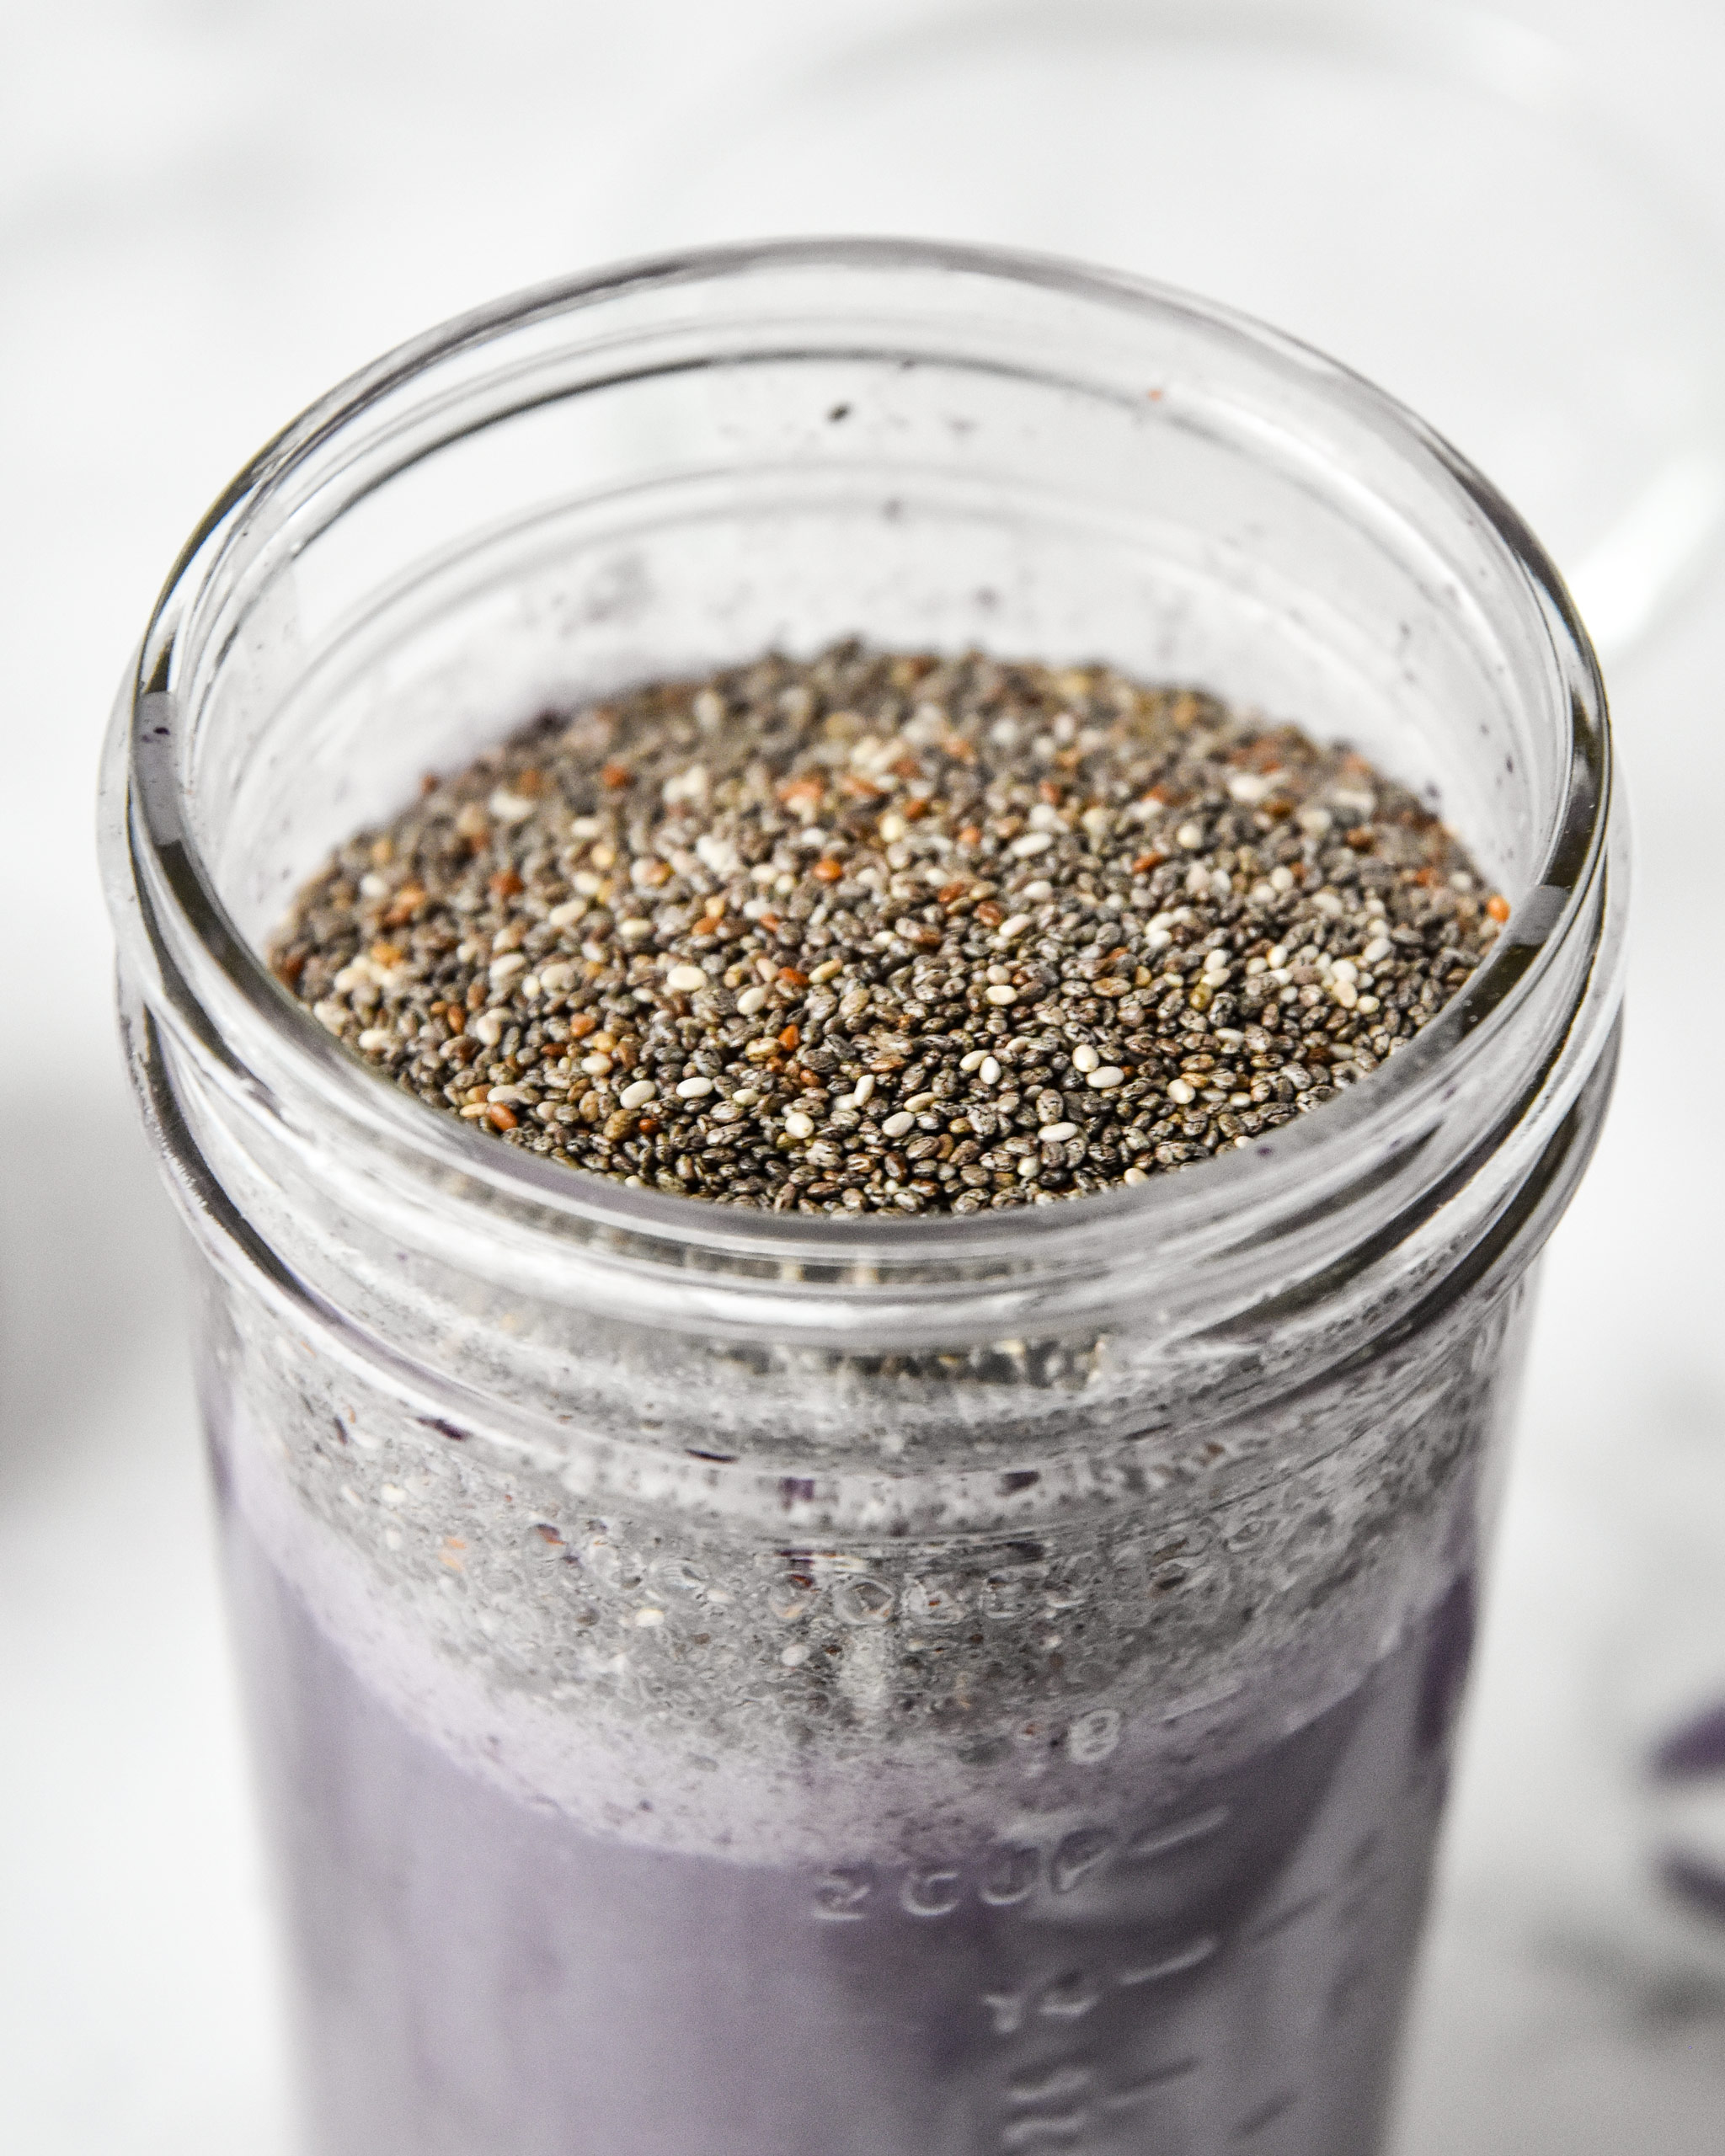 chia seeds added to the milk and blueberries